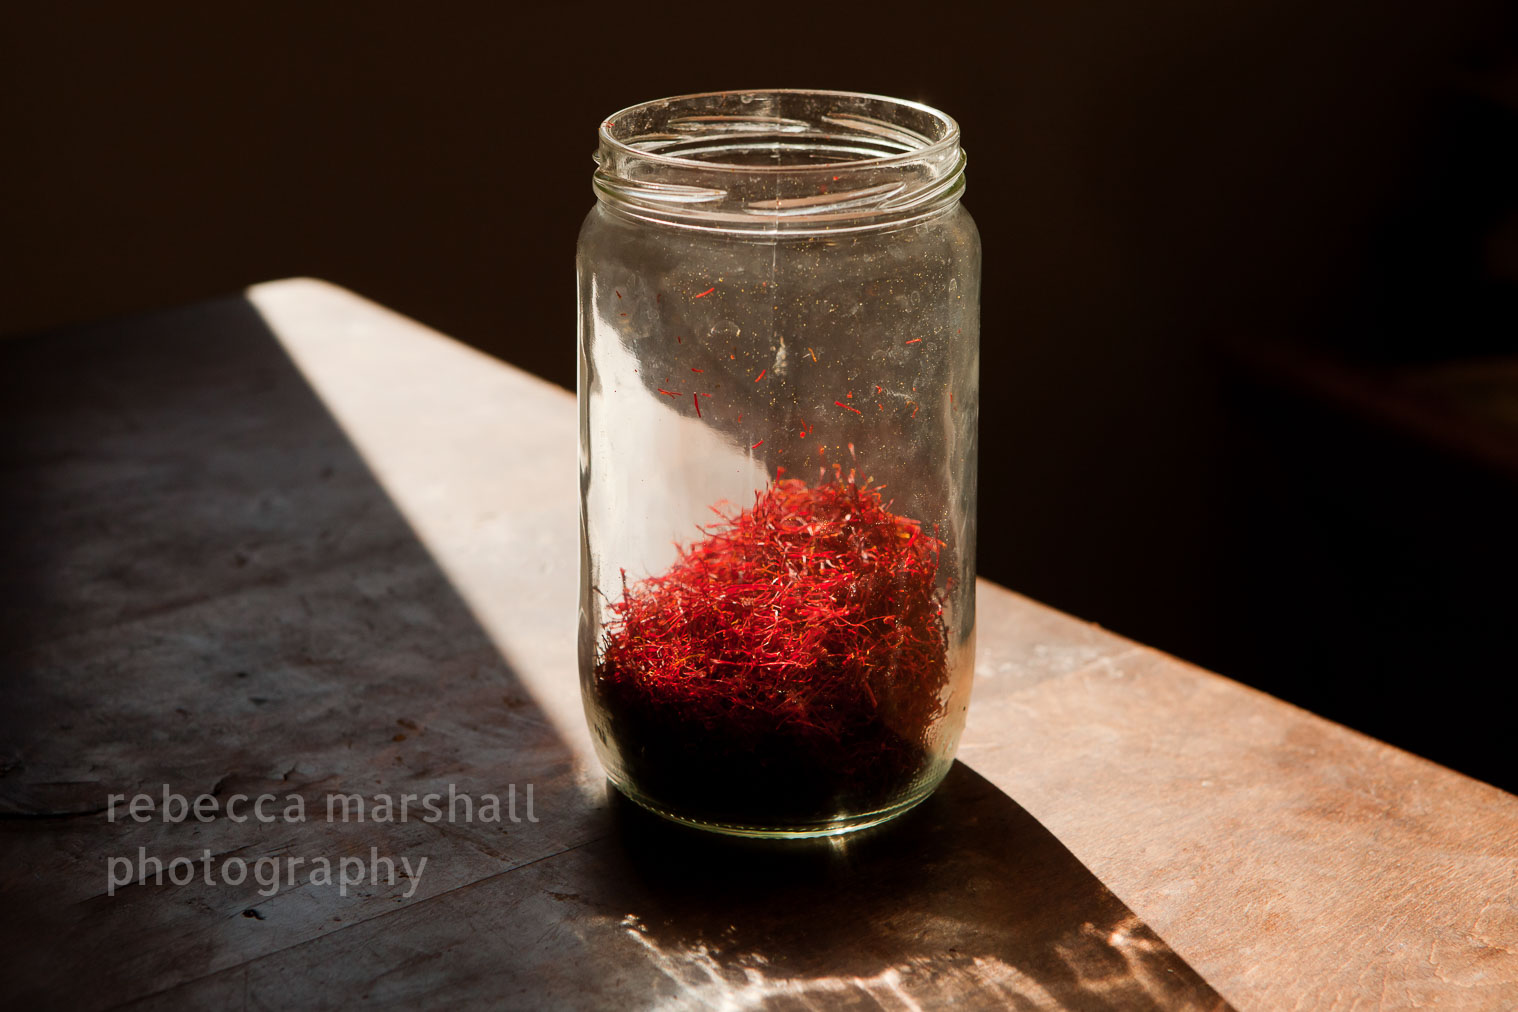 Photograph of a jar one-third full of dried saffron, red in the sunlight